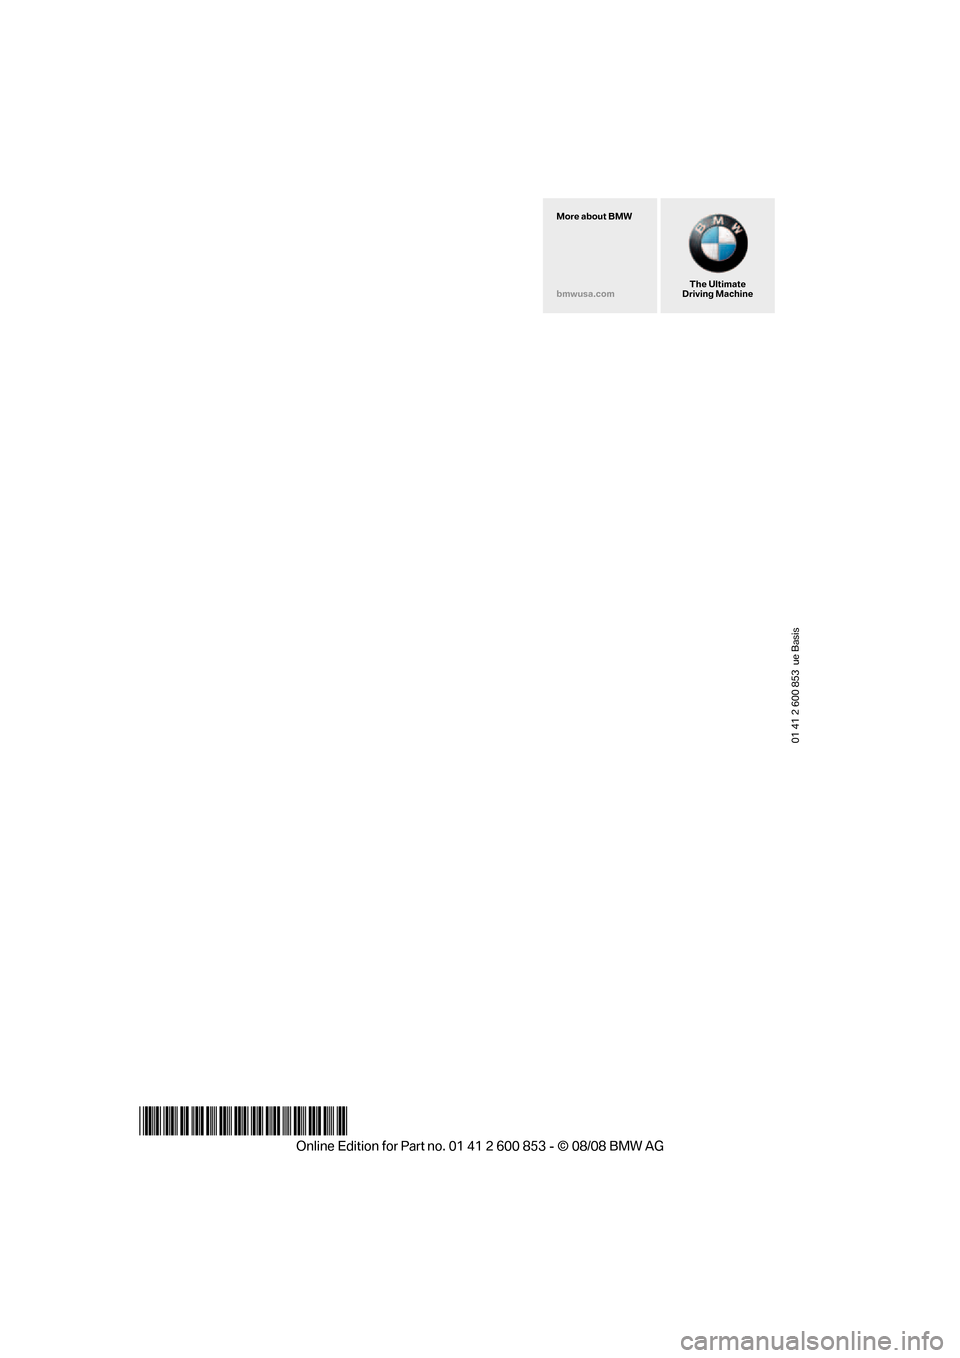 BMW 135I 2009 E88 Owners Manual 01 41 2 600 853  ue Basis
*BL260085300W*
The Ultimate
Driving Machine More about BMW
bmwusa.com 